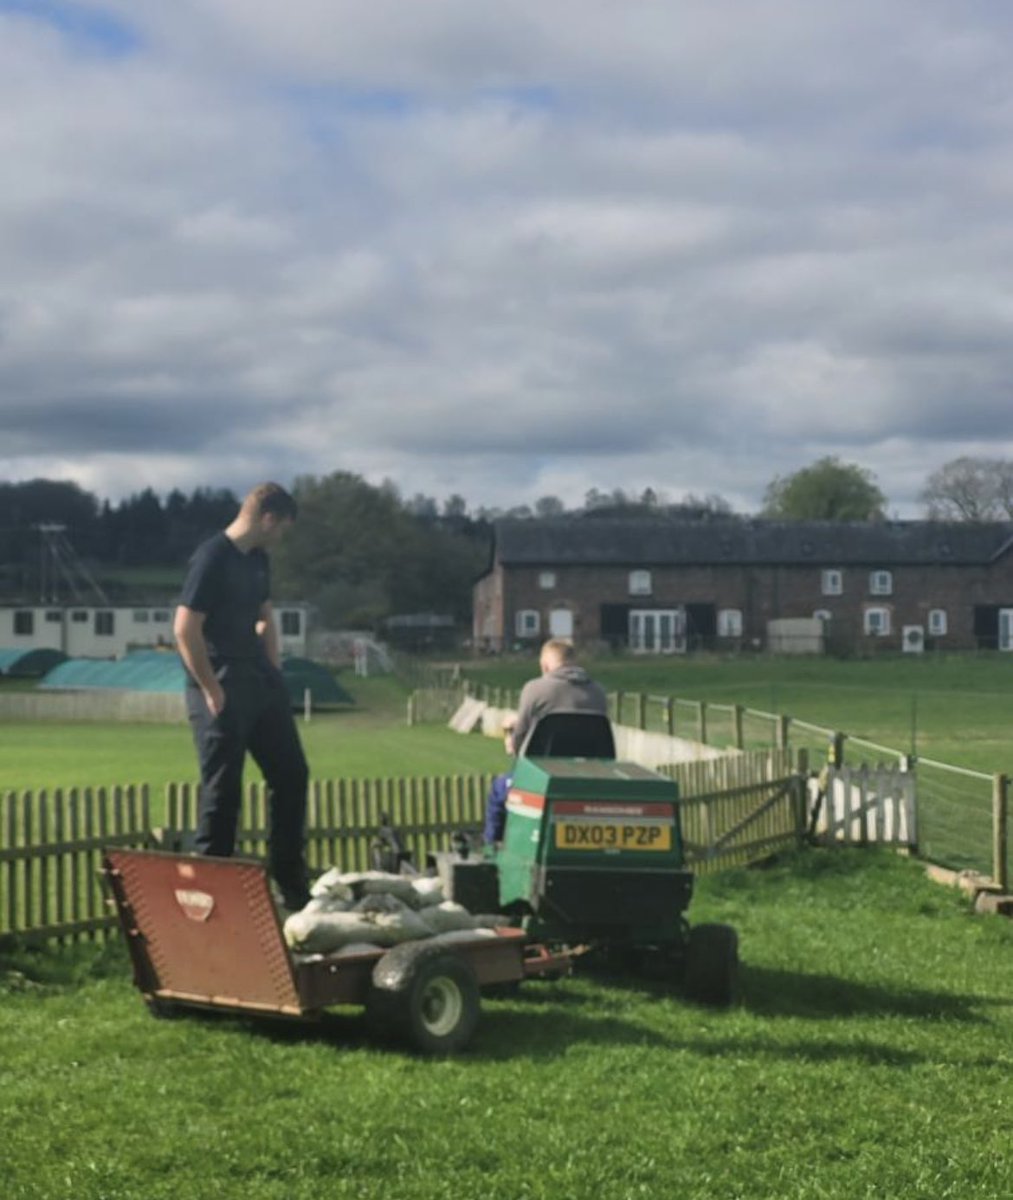 Season preparation!✅ Great to get some jobs done around the ground ready for the cricket season ! Massive thank you to everyone who came to help out today! Bring on the cricket season!🏏